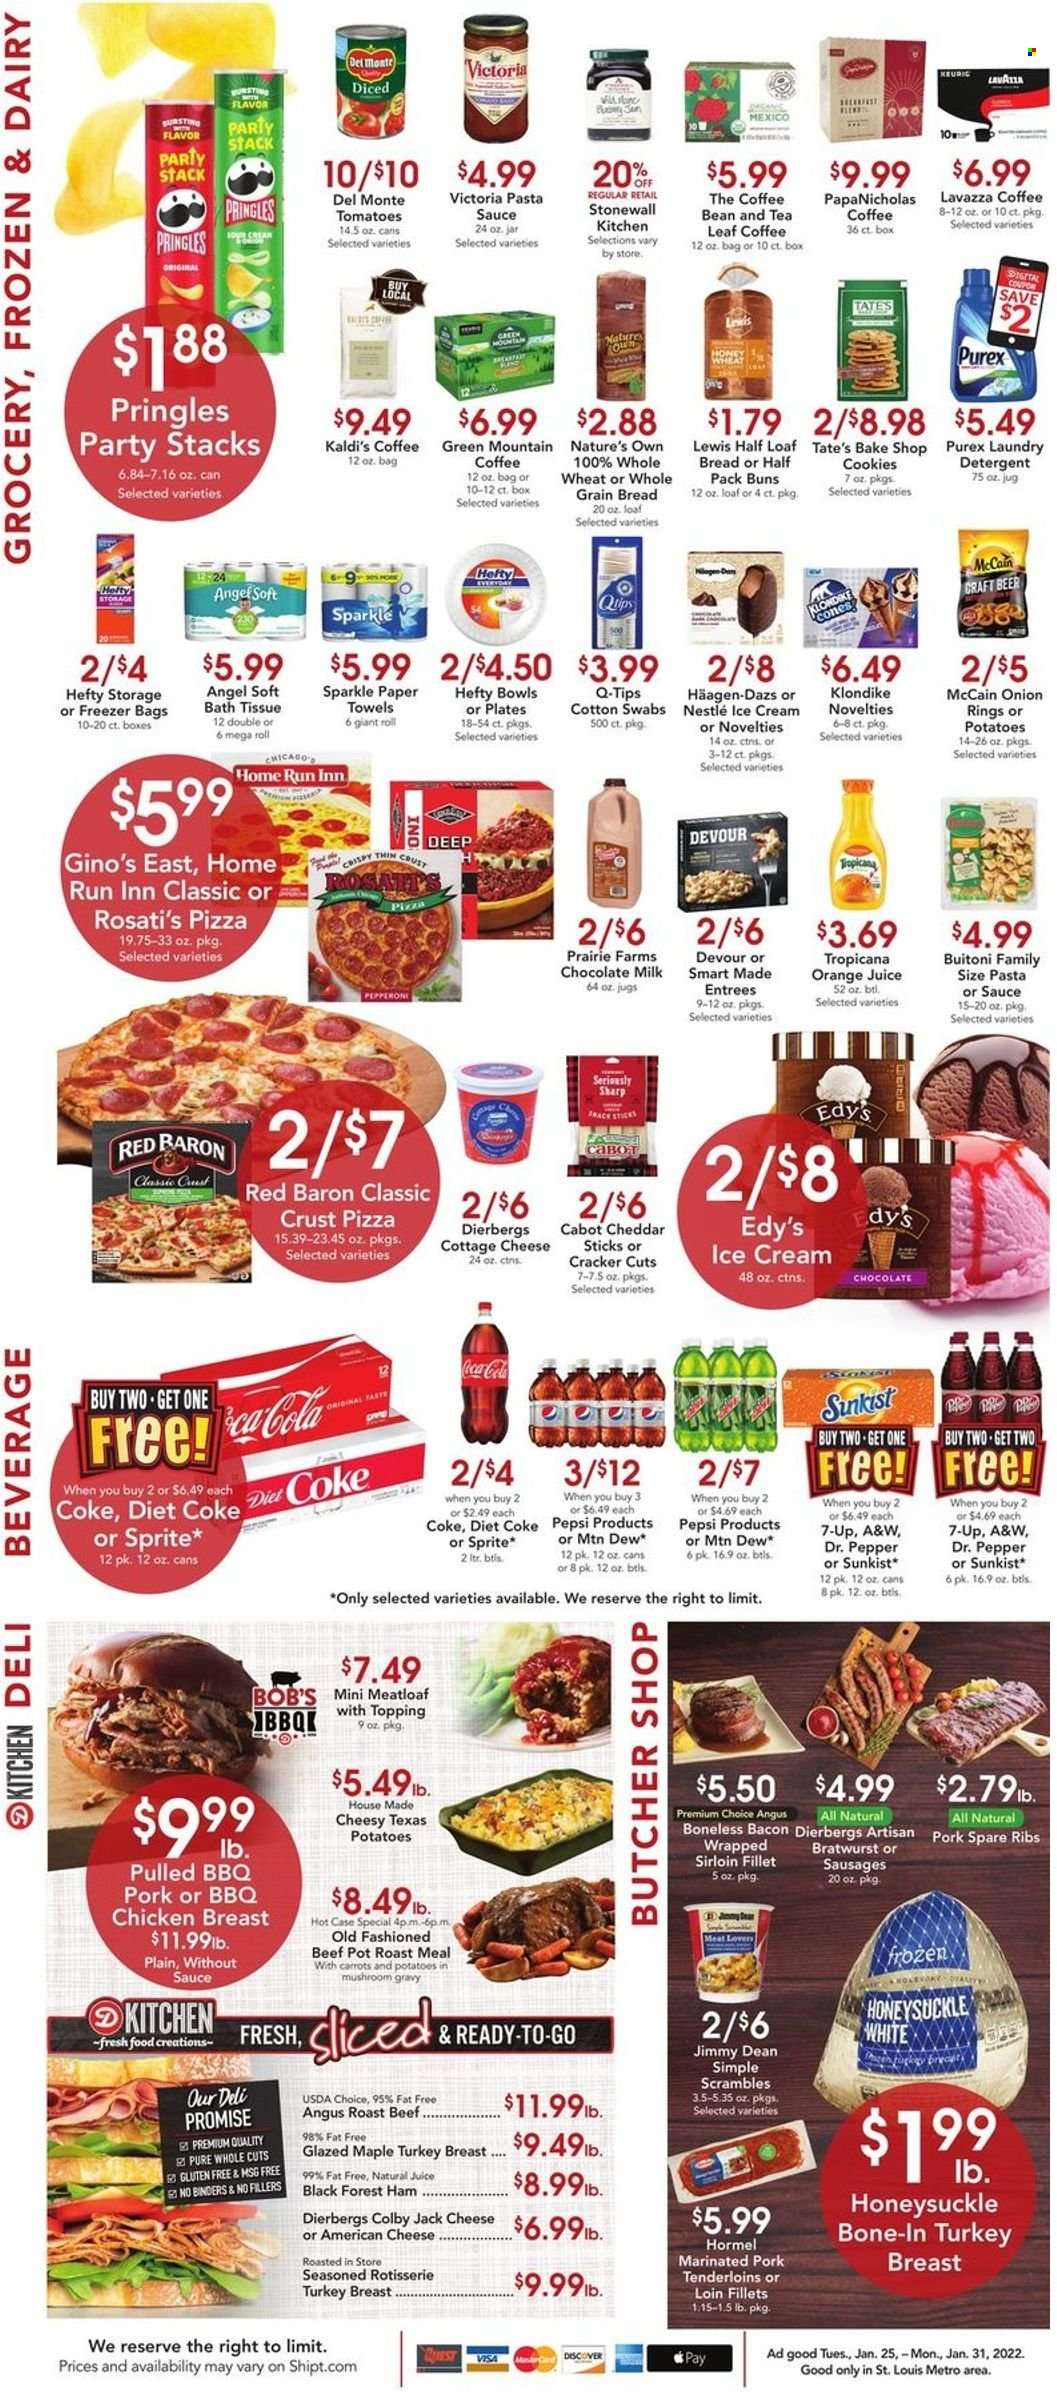 thumbnail - Dierbergs Flyer - 01/25/2022 - 01/31/2022 - Sales products - buns, pizza, pasta sauce, onion rings, meatloaf, pulled pork, Jimmy Dean, Hormel, Buitoni, ready meal, bacon, turkey breast, ham, chicken breasts, roast beef, bratwurst, sausage, american cheese, Colby cheese, cottage cheese, cheese, milk, flavoured milk, ice cream, ice cream bars, Häagen-Dazs, ice cones, Devour, McCain, Red Baron, Nestlé, Pringles, chips, salty snack, topping, canned tomatoes, Del Monte, mushroom gravy, Coca-Cola, Mountain Dew, Sprite, Pepsi, orange juice, Dr. Pepper, Diet Coke, soft drink, 7UP, A&W, Coke, carbonated soft drink, tea, Lavazza, Green Mountain, beer, turkey, beef meat, ribs, pot roast, pork meat, pork ribs, pork tenderloin, pork spare ribs, Nature's Own, brace. Page 2.